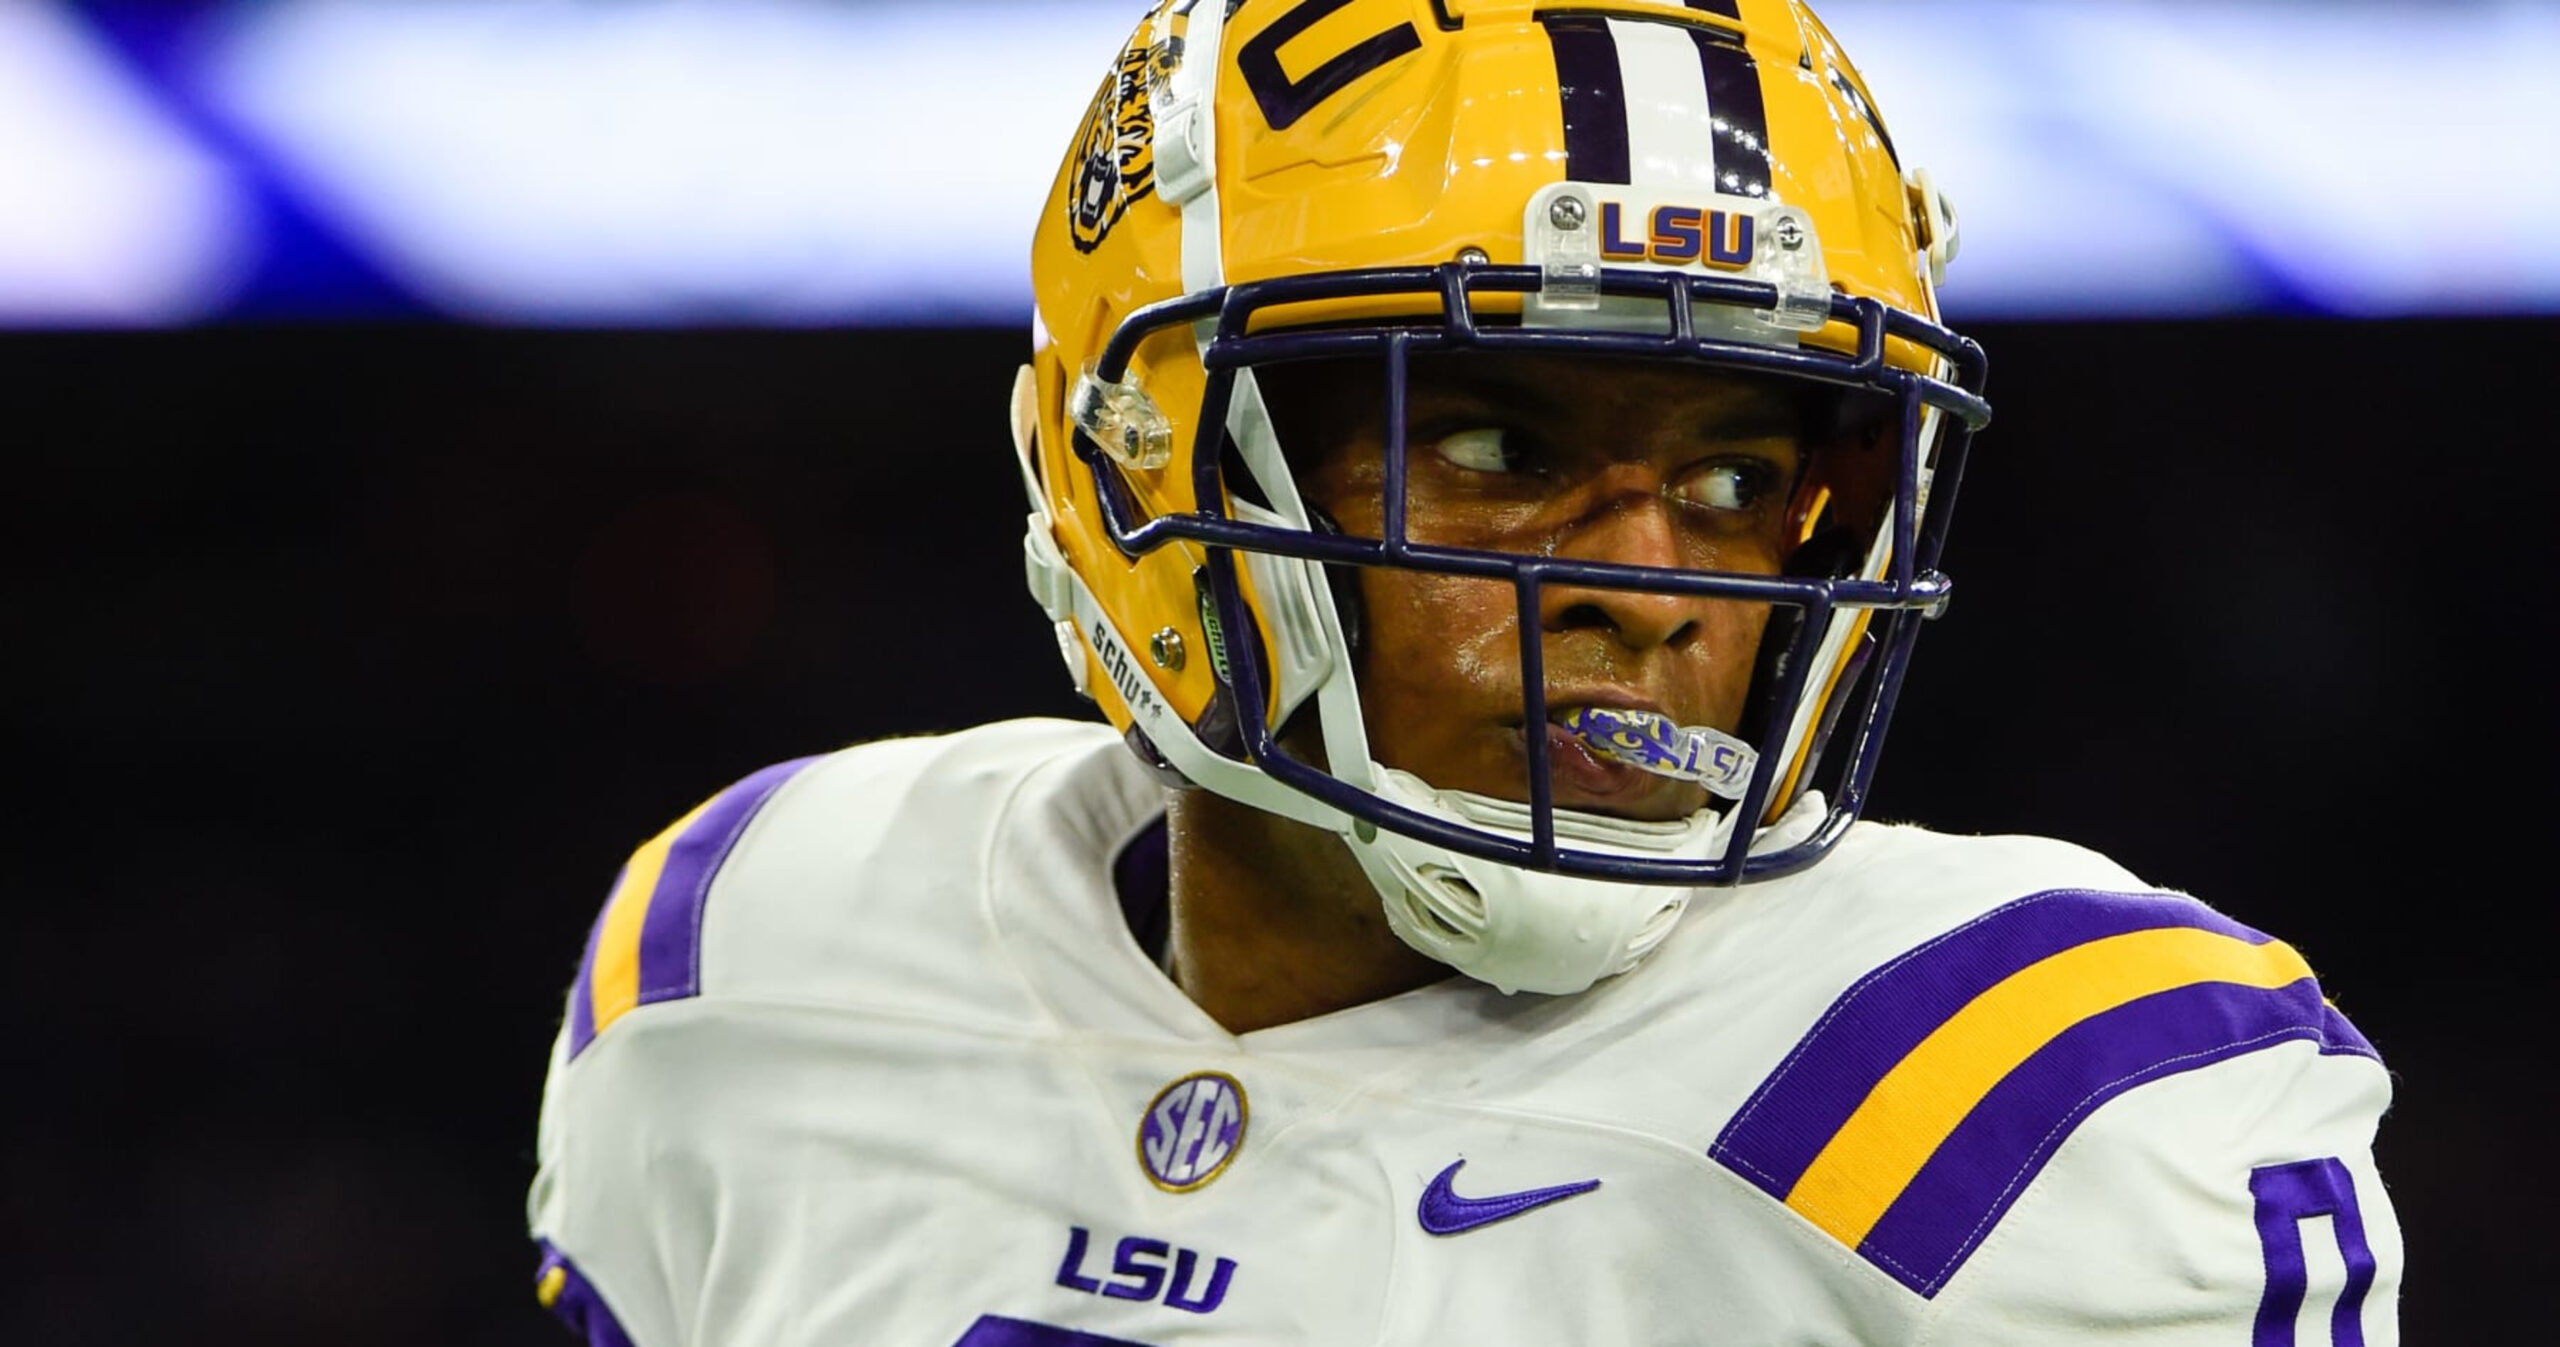 Report: LSU DT Maason Smith Out for Season with Injury; Tore ACL While Celebrating